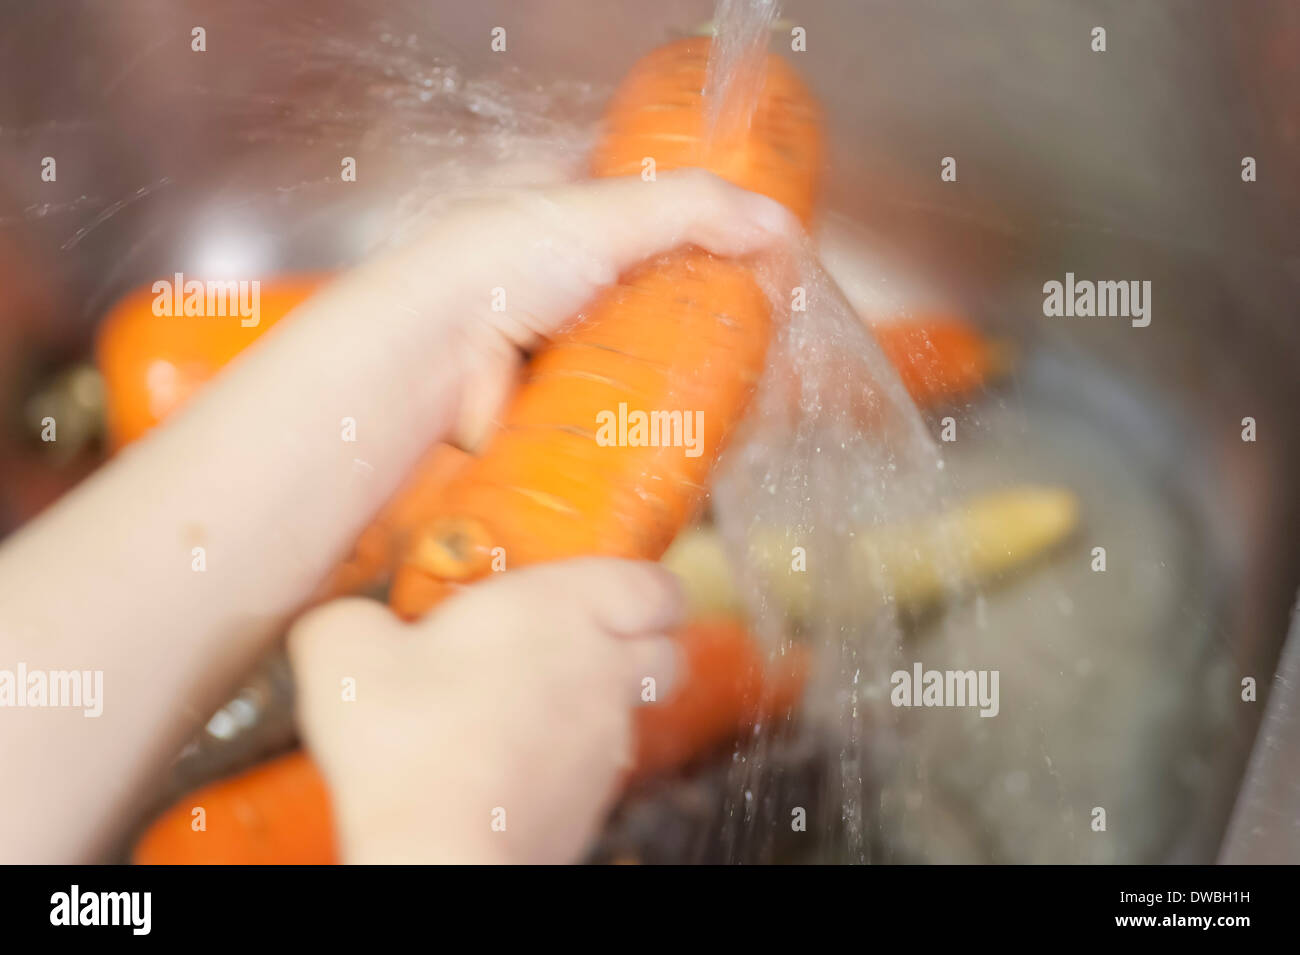 Carrots are being washed Stock Photo